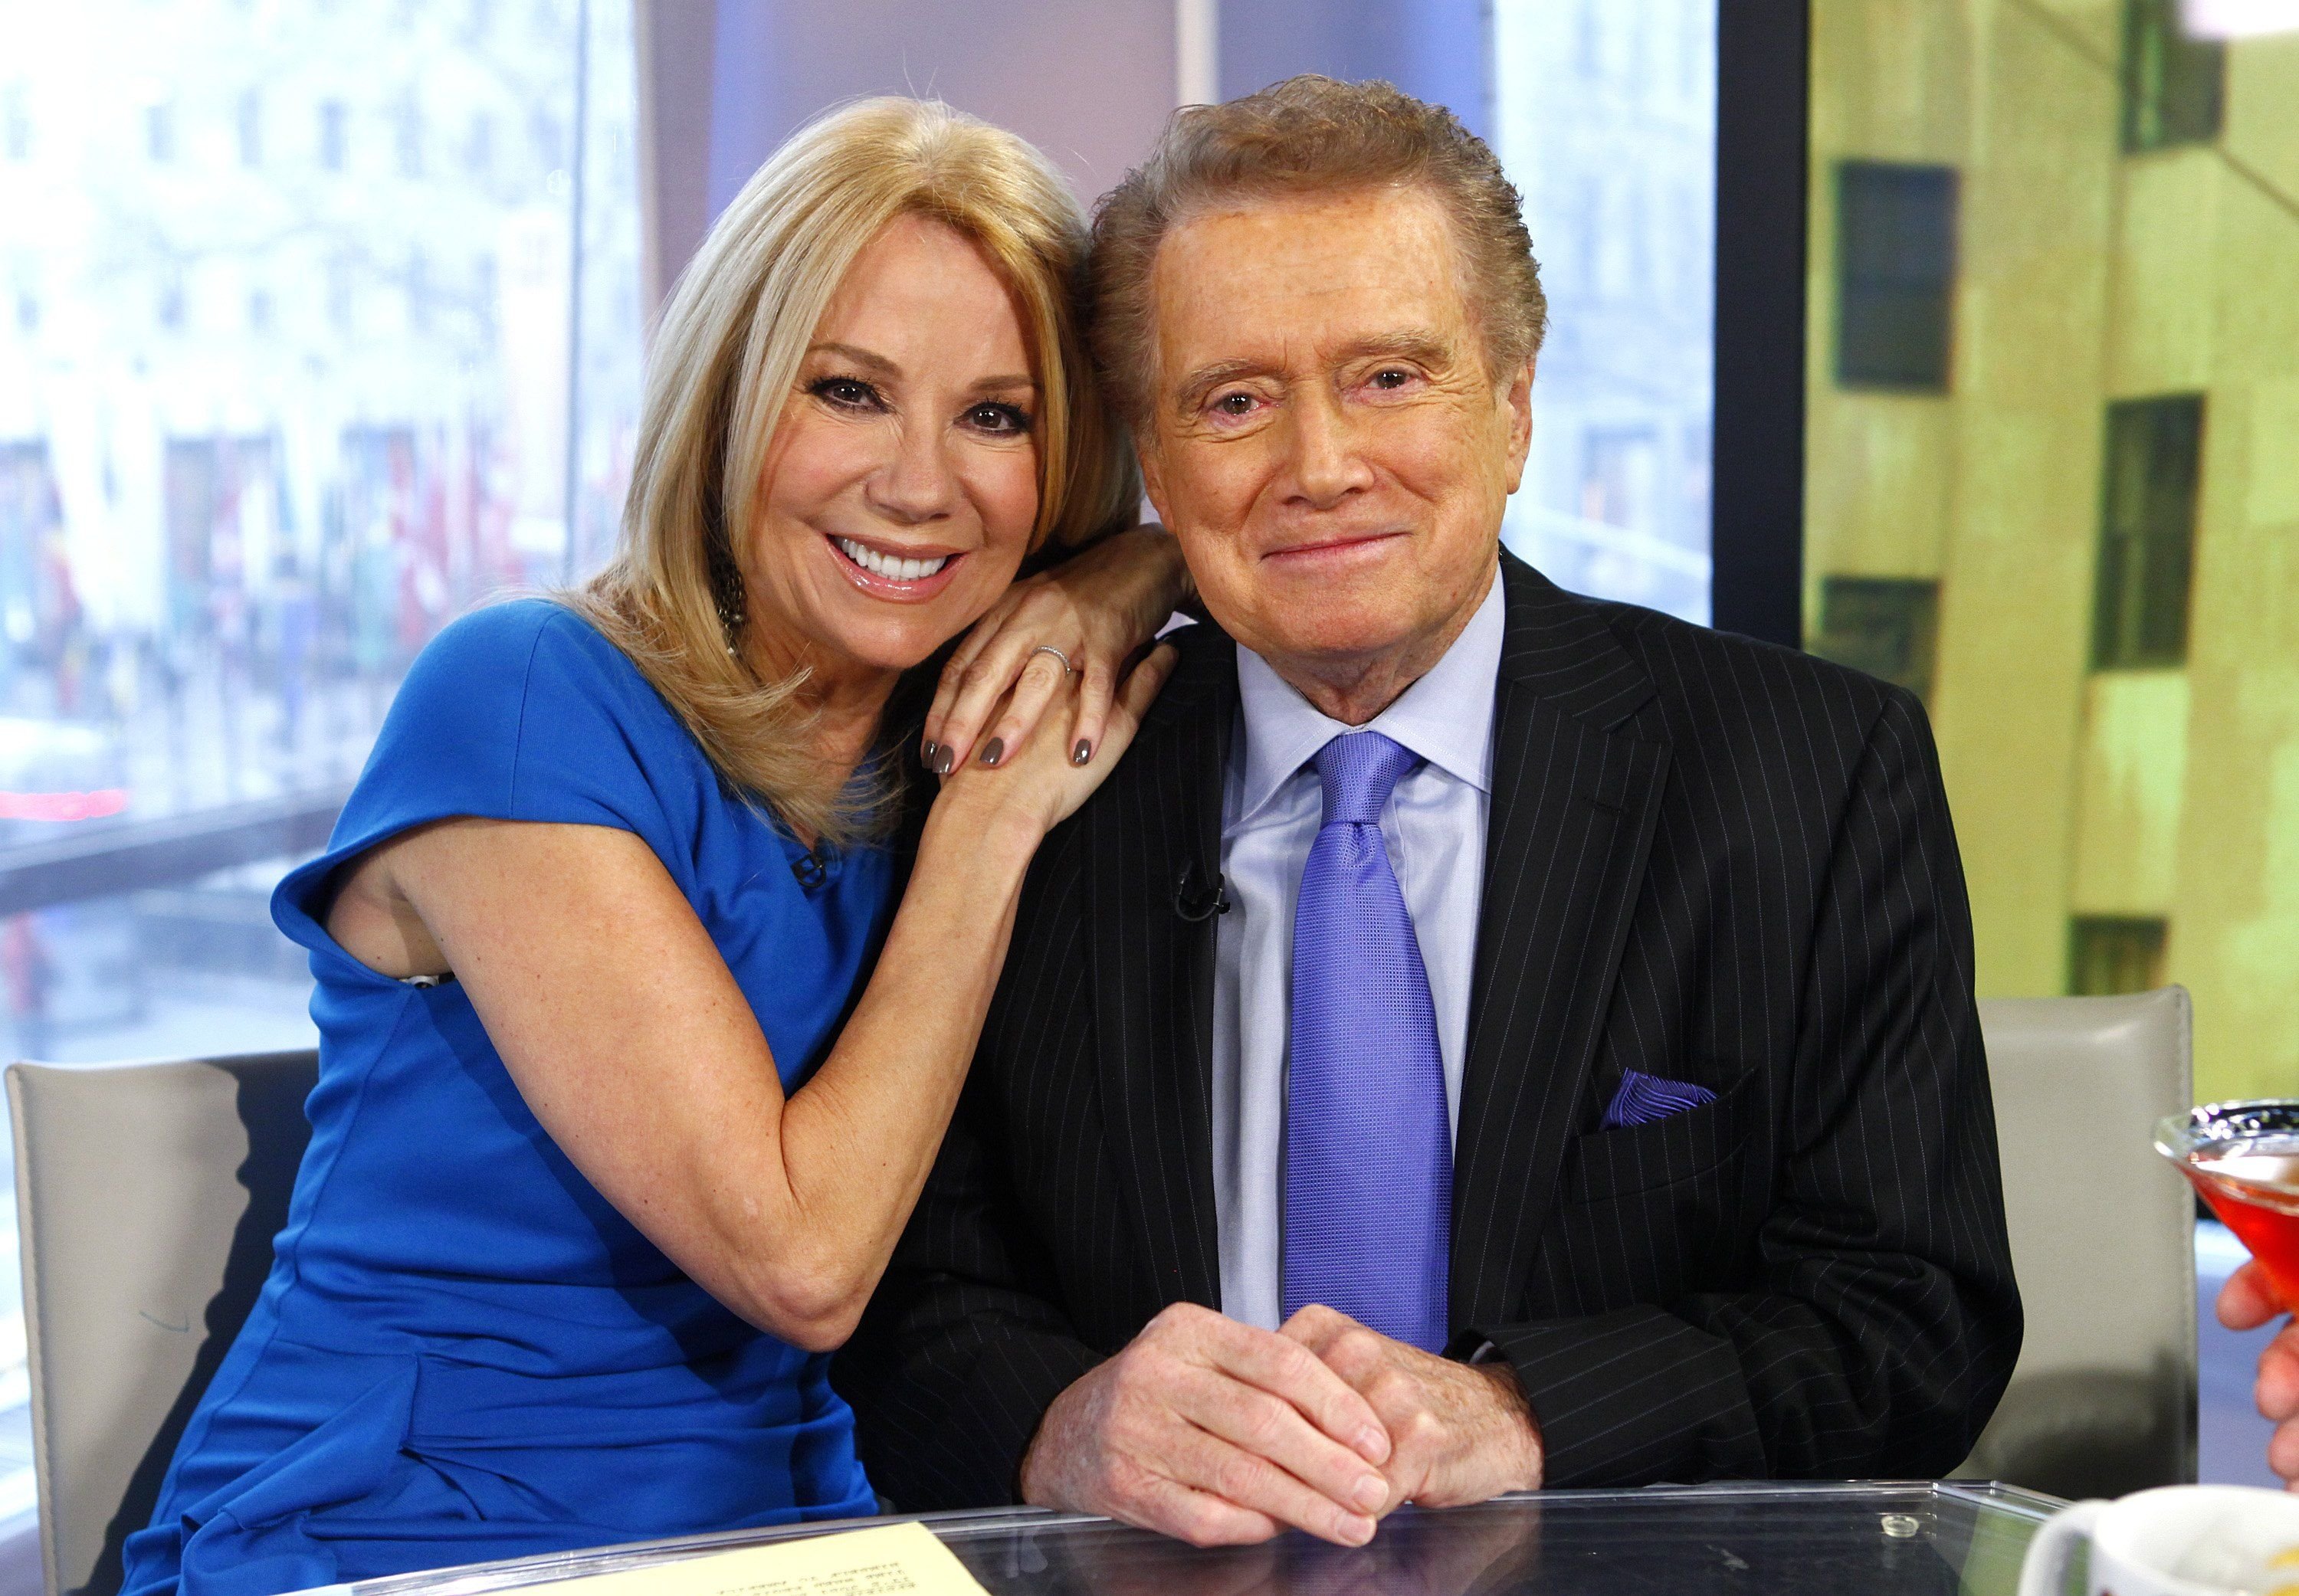 Television hosts Kathie Lee Gifford and Regis Philbin hugging during a segment of NBC News' "Today Show" | Photo: Peter Kramer/NBC/NBC NewsWire